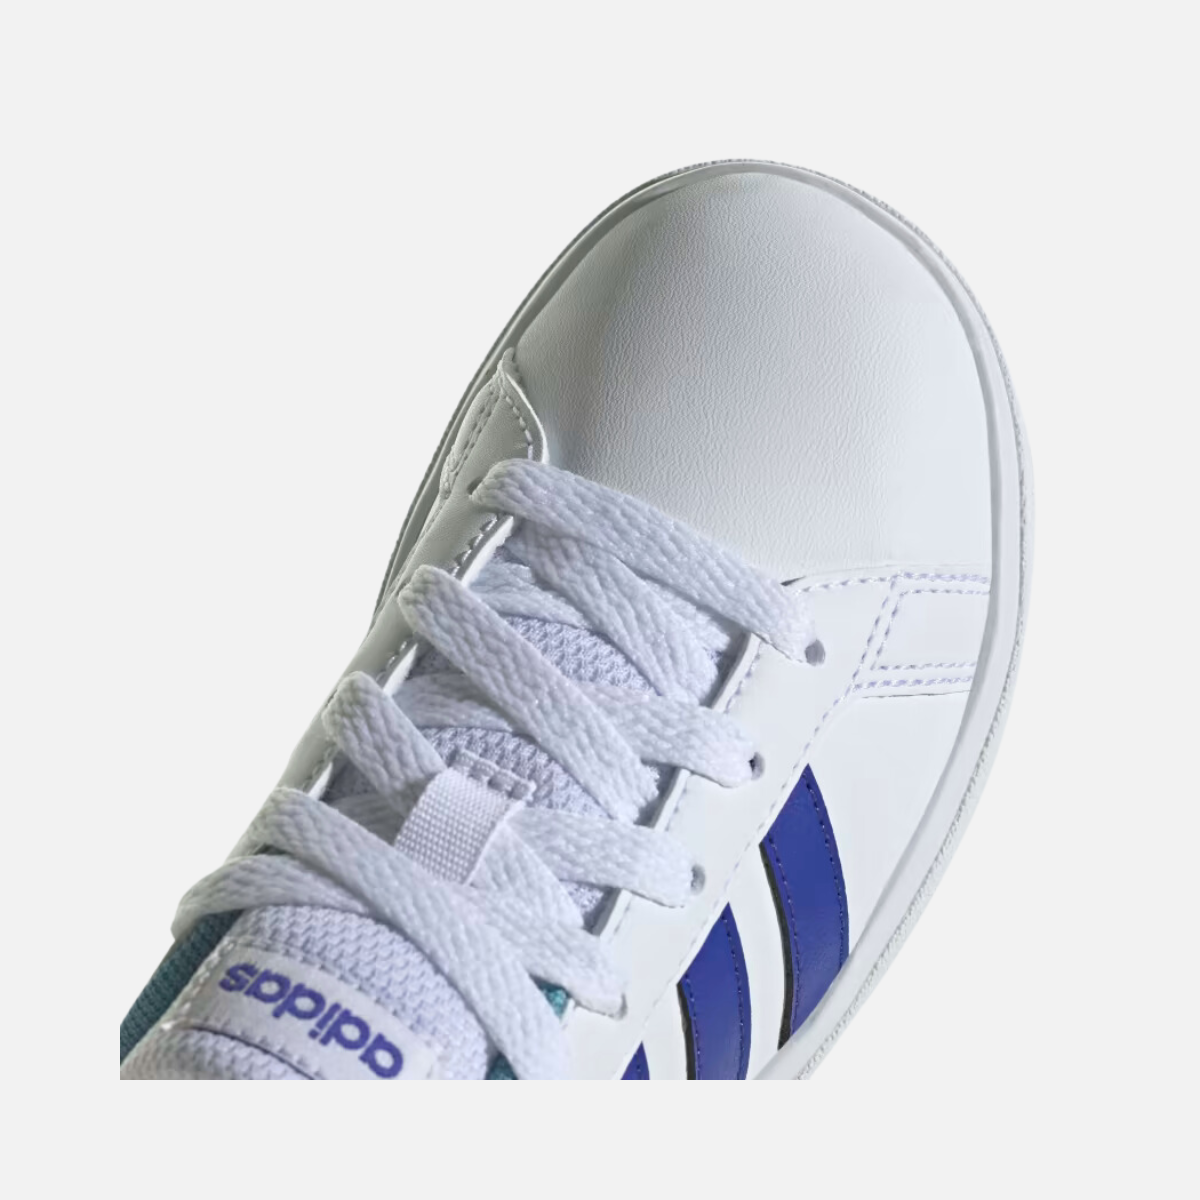 Adidas GRAND COURT 2.0 Kids Unisex Shoes BOY AND GIRL (15 YEAR)-Cloud White/Lucid Blue/Preloved Blue